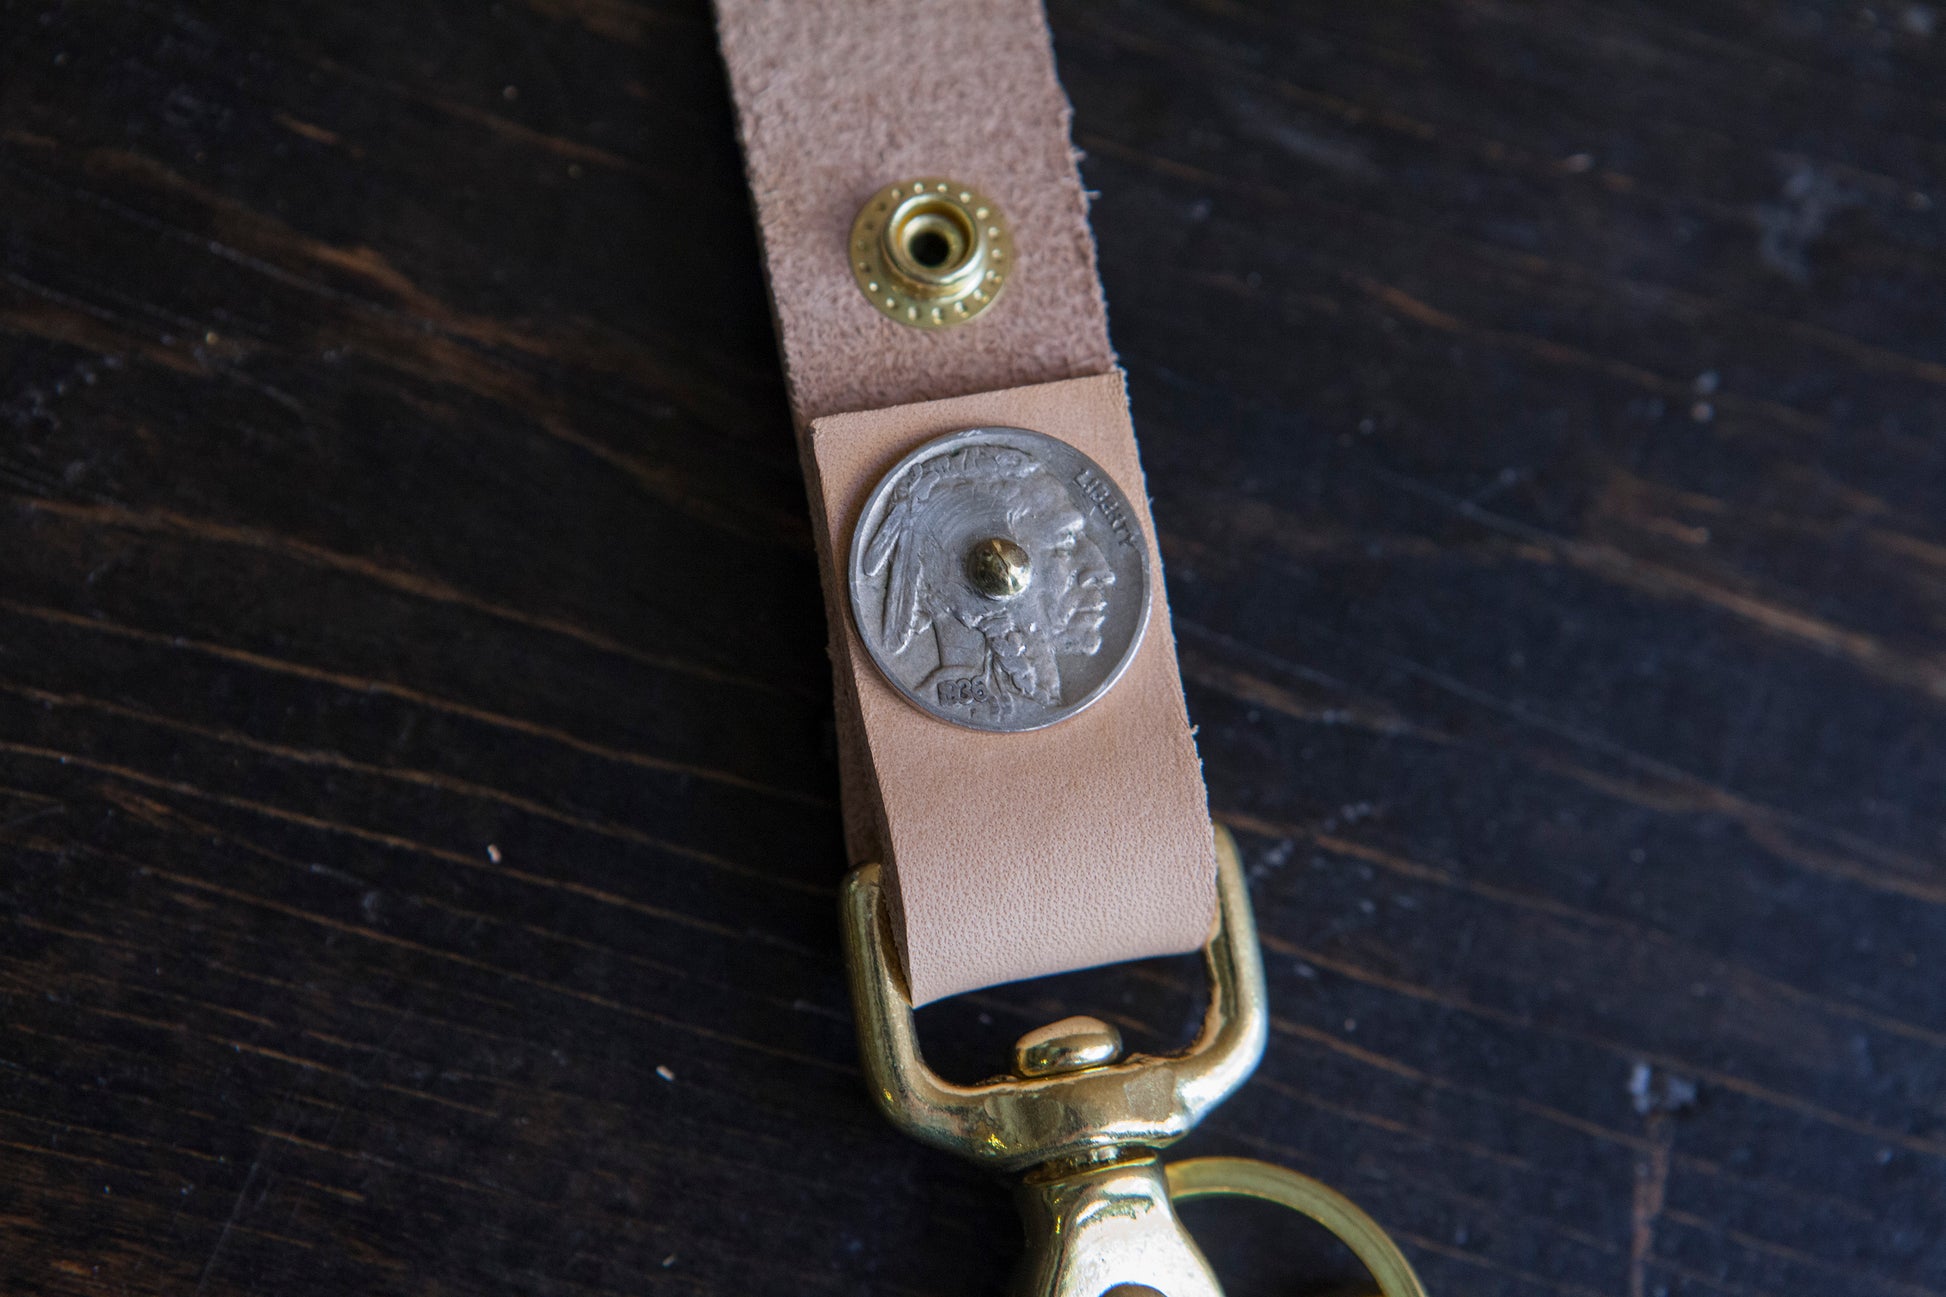 Buffalo Head Leather - Belts, Keychains and Wallets